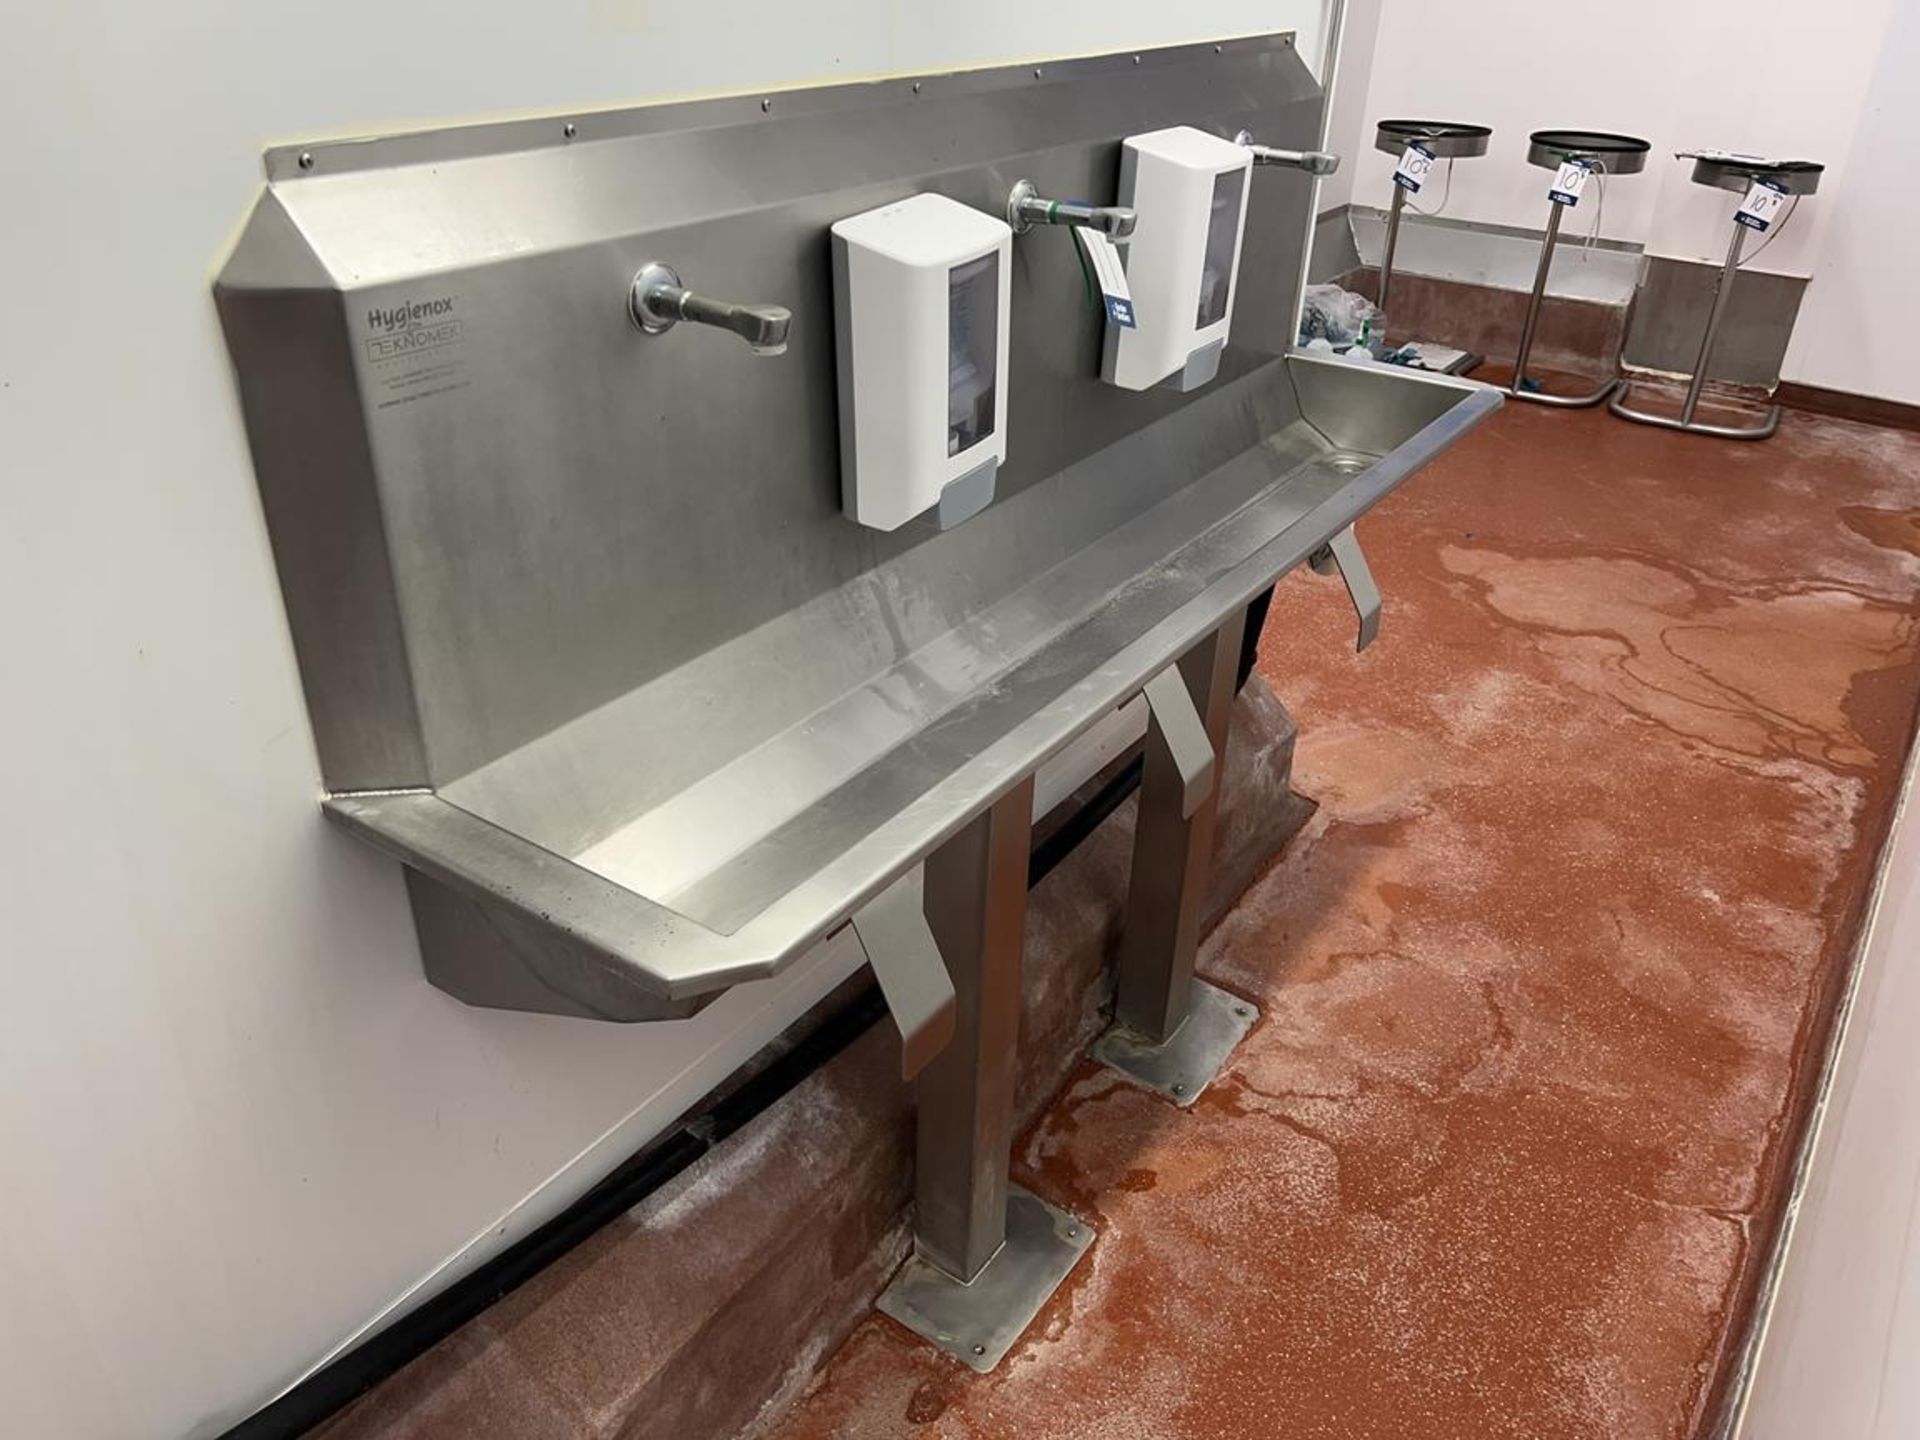 Hygienox Teknomek, three position, knee operated, stainless steel sink unit, 1.6m x 380mm x 1.3m (H) - Image 4 of 10